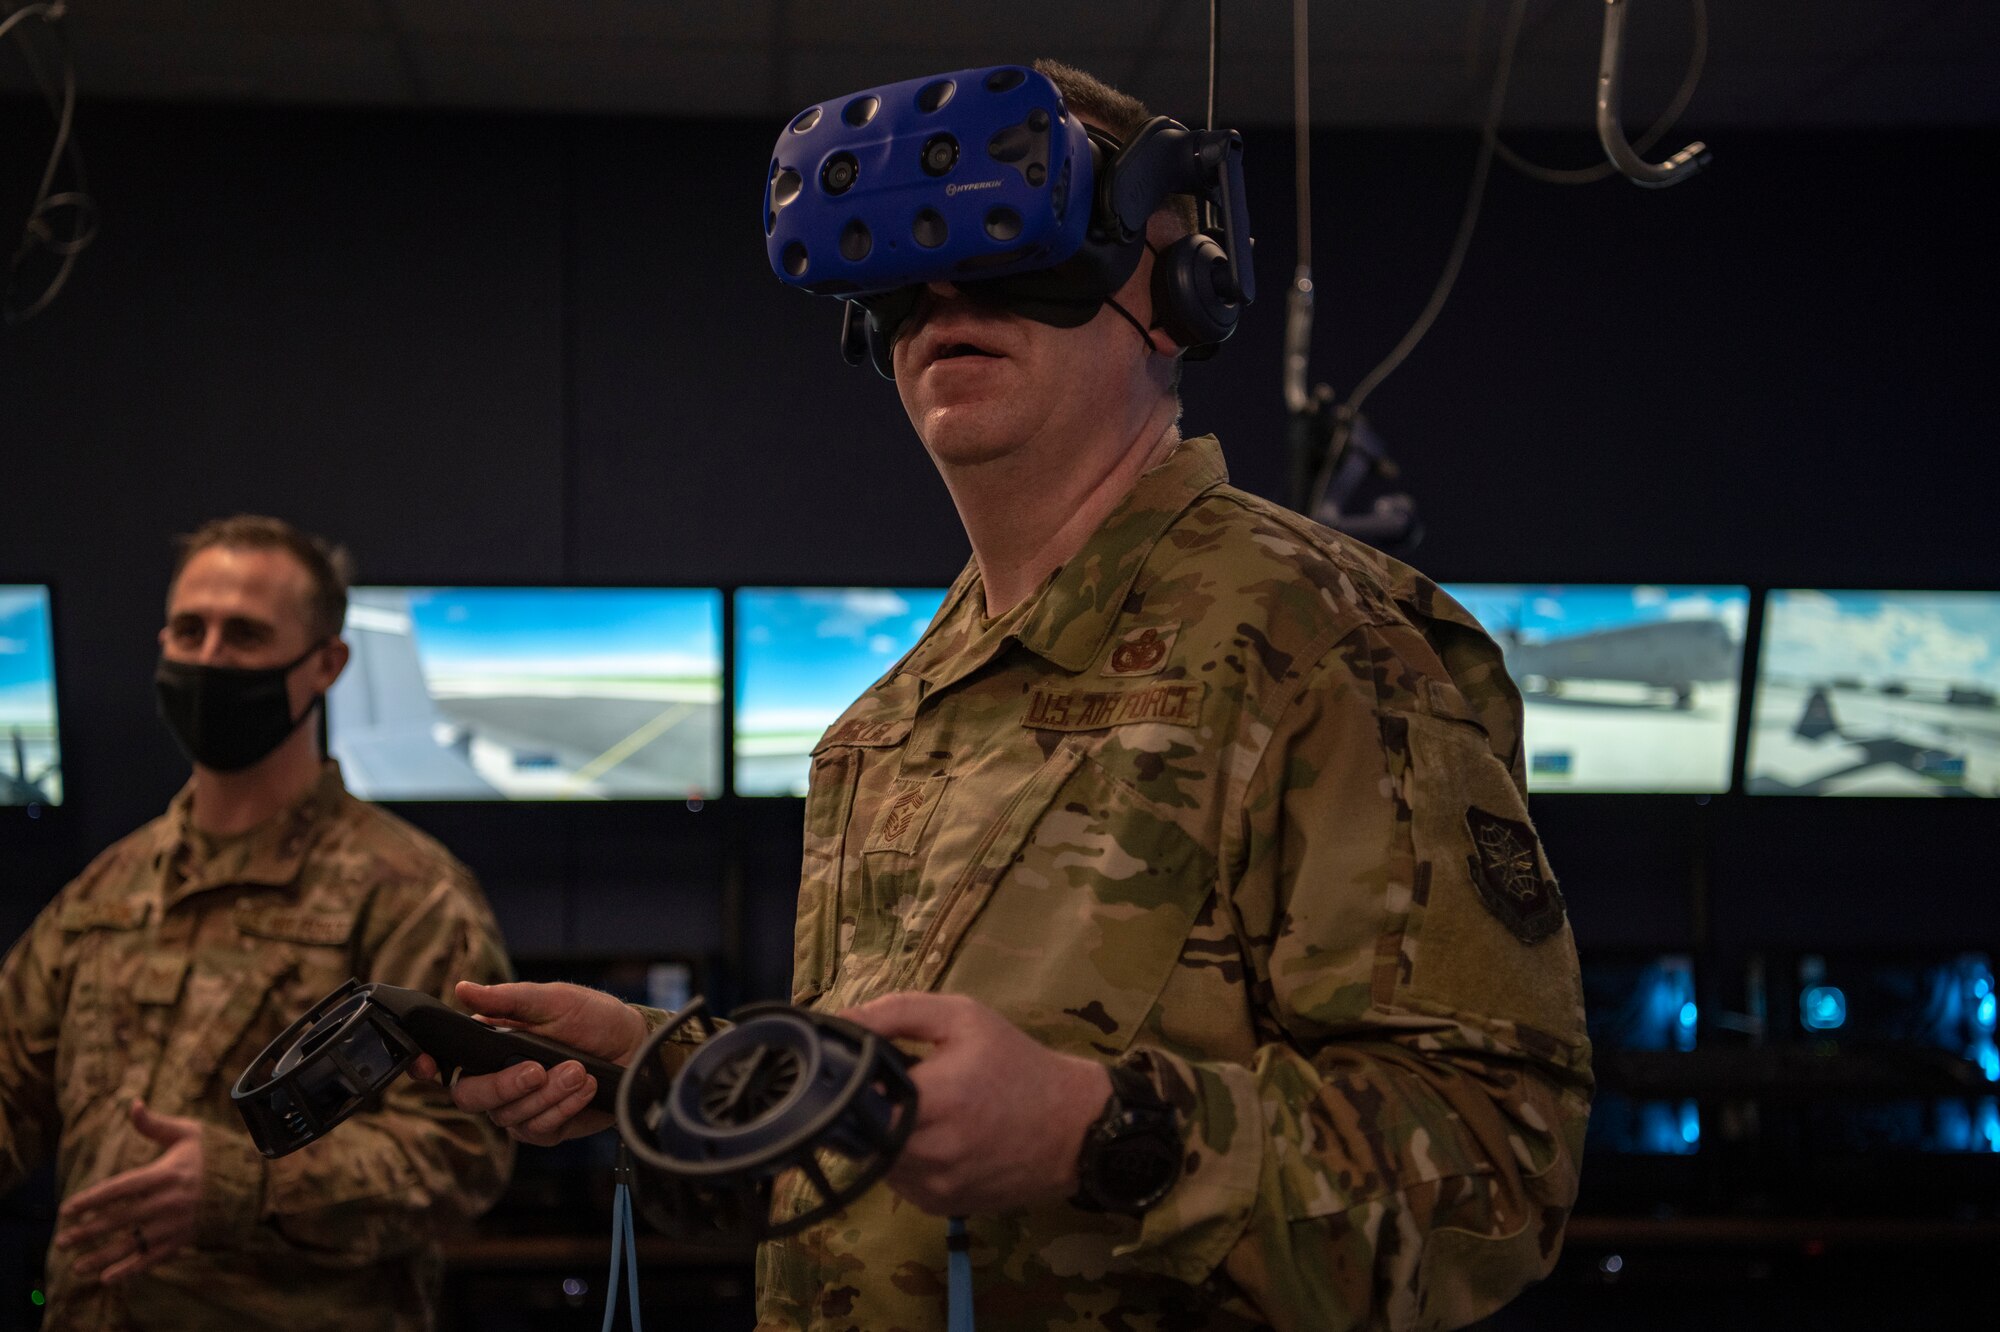 Chief Master Sgt. Chad Bickley, 18th Air Force command chief, looks through a virtual reality headset at Dyess Air Force Base, Texas, Mar. 3, 2021.